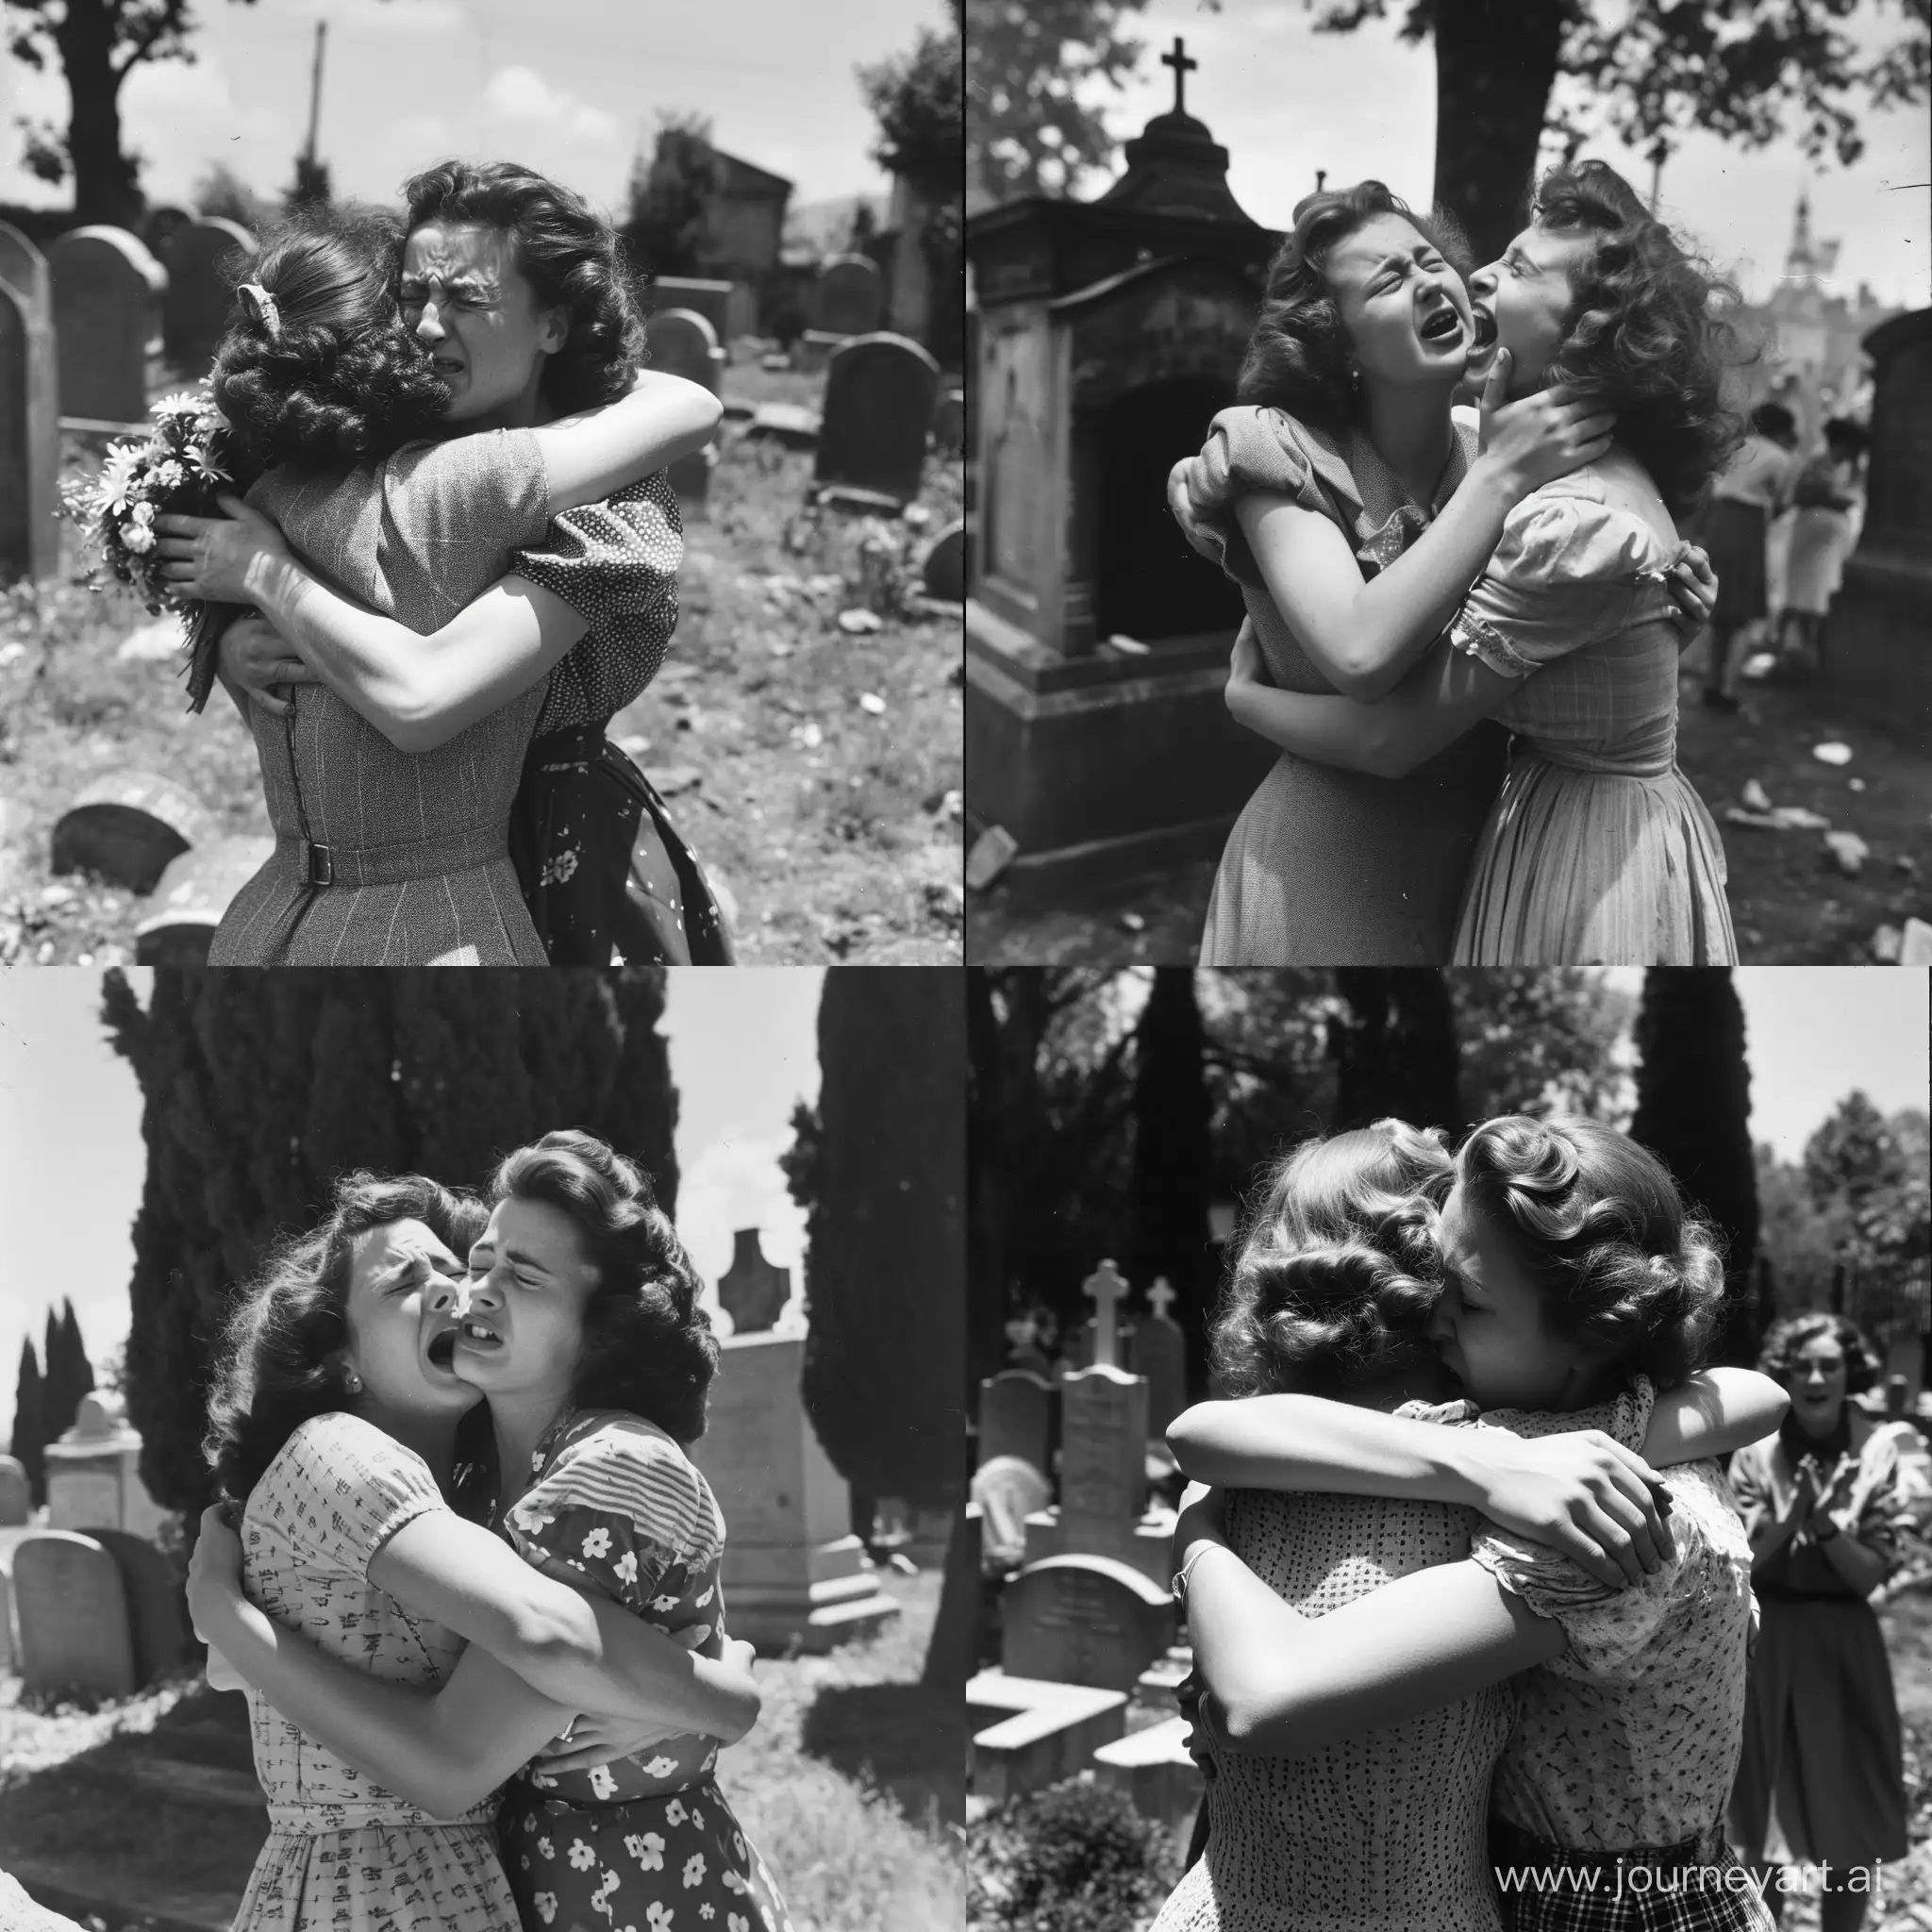 All Girls Friends Lesbian european french and short sleeves puffy sleeves compression 1950s Photo hug crying wail cemetery